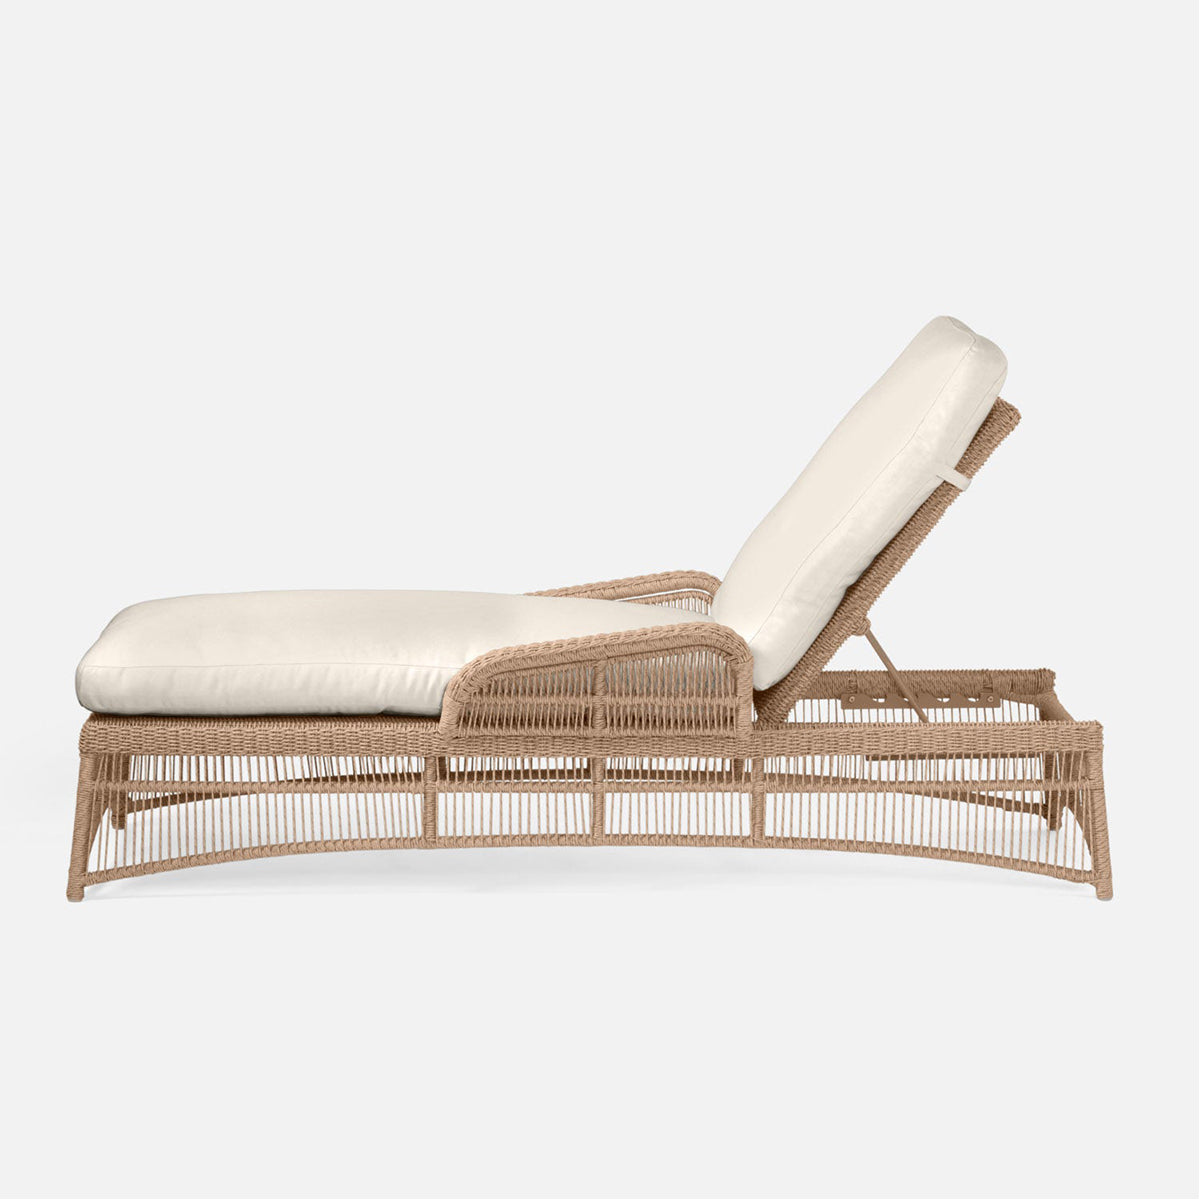 Made Goods Soma Outdoor Chaise Lounge in Weser Fabric